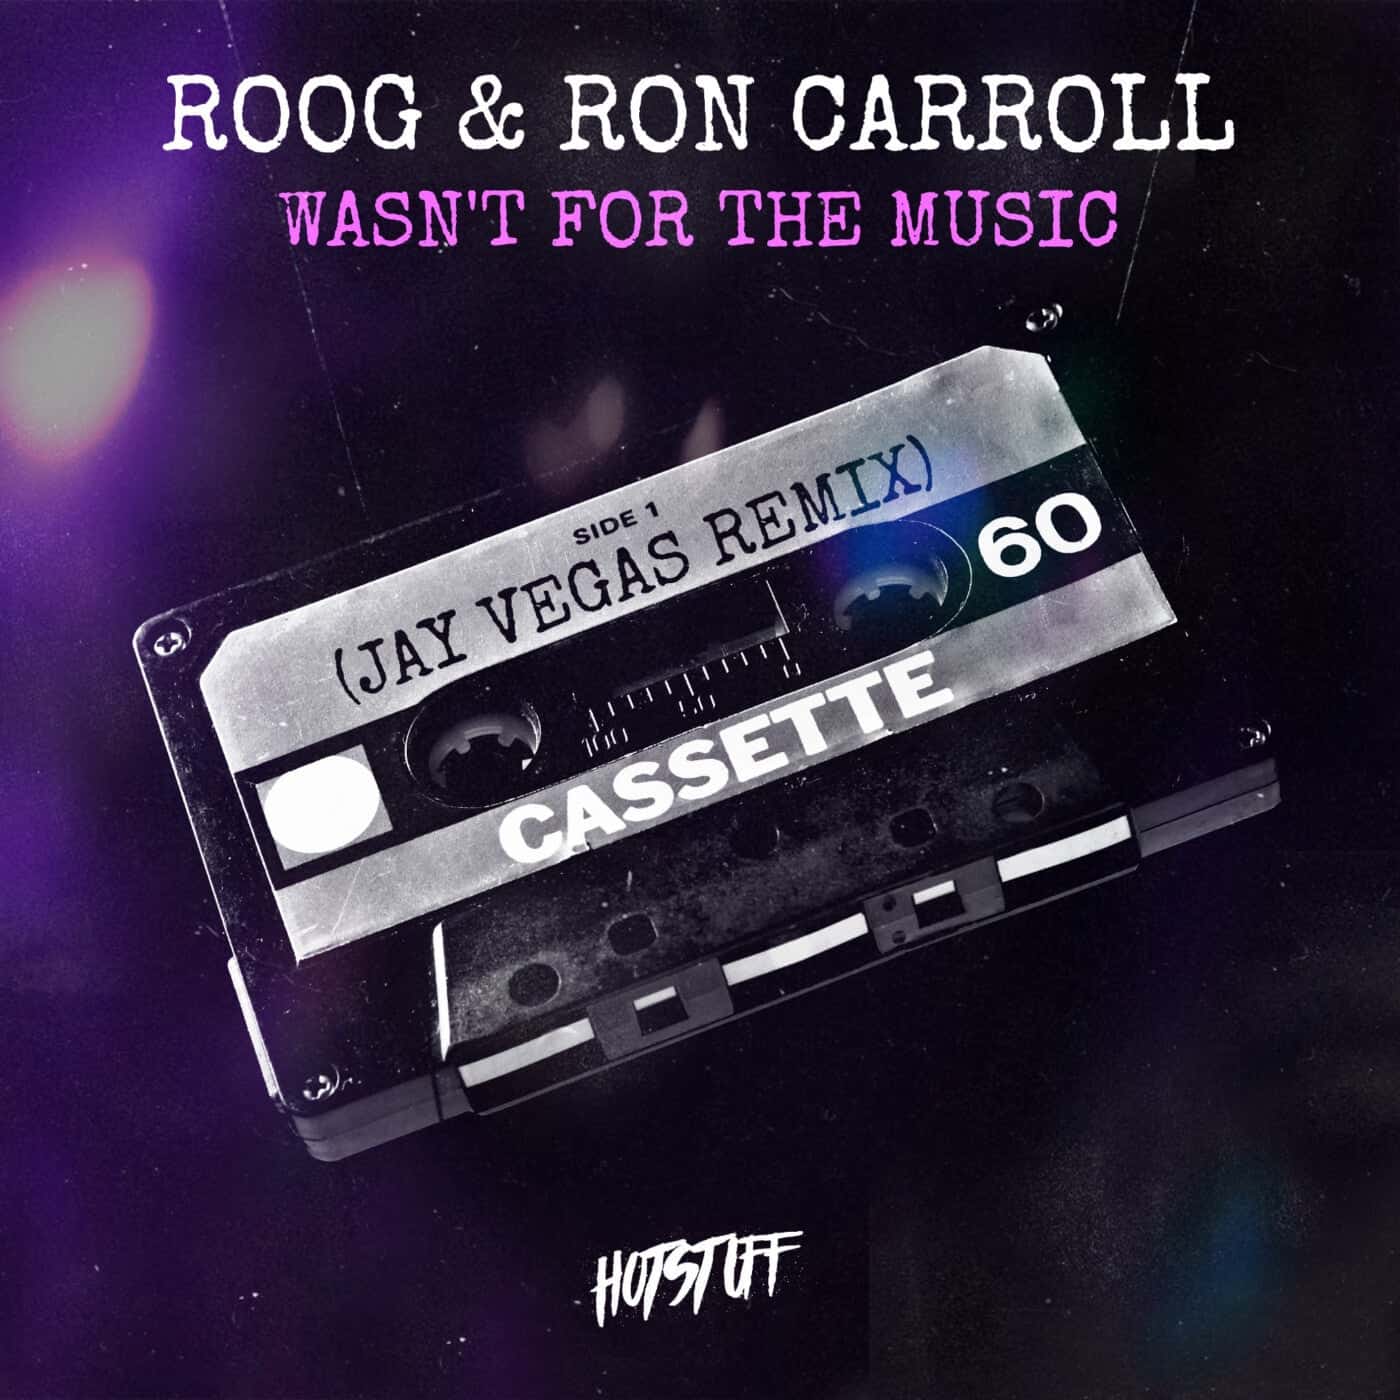 image cover: Ron Carroll, Roog - Wasn't For The Music (Jay Vegas Remix) / HS153